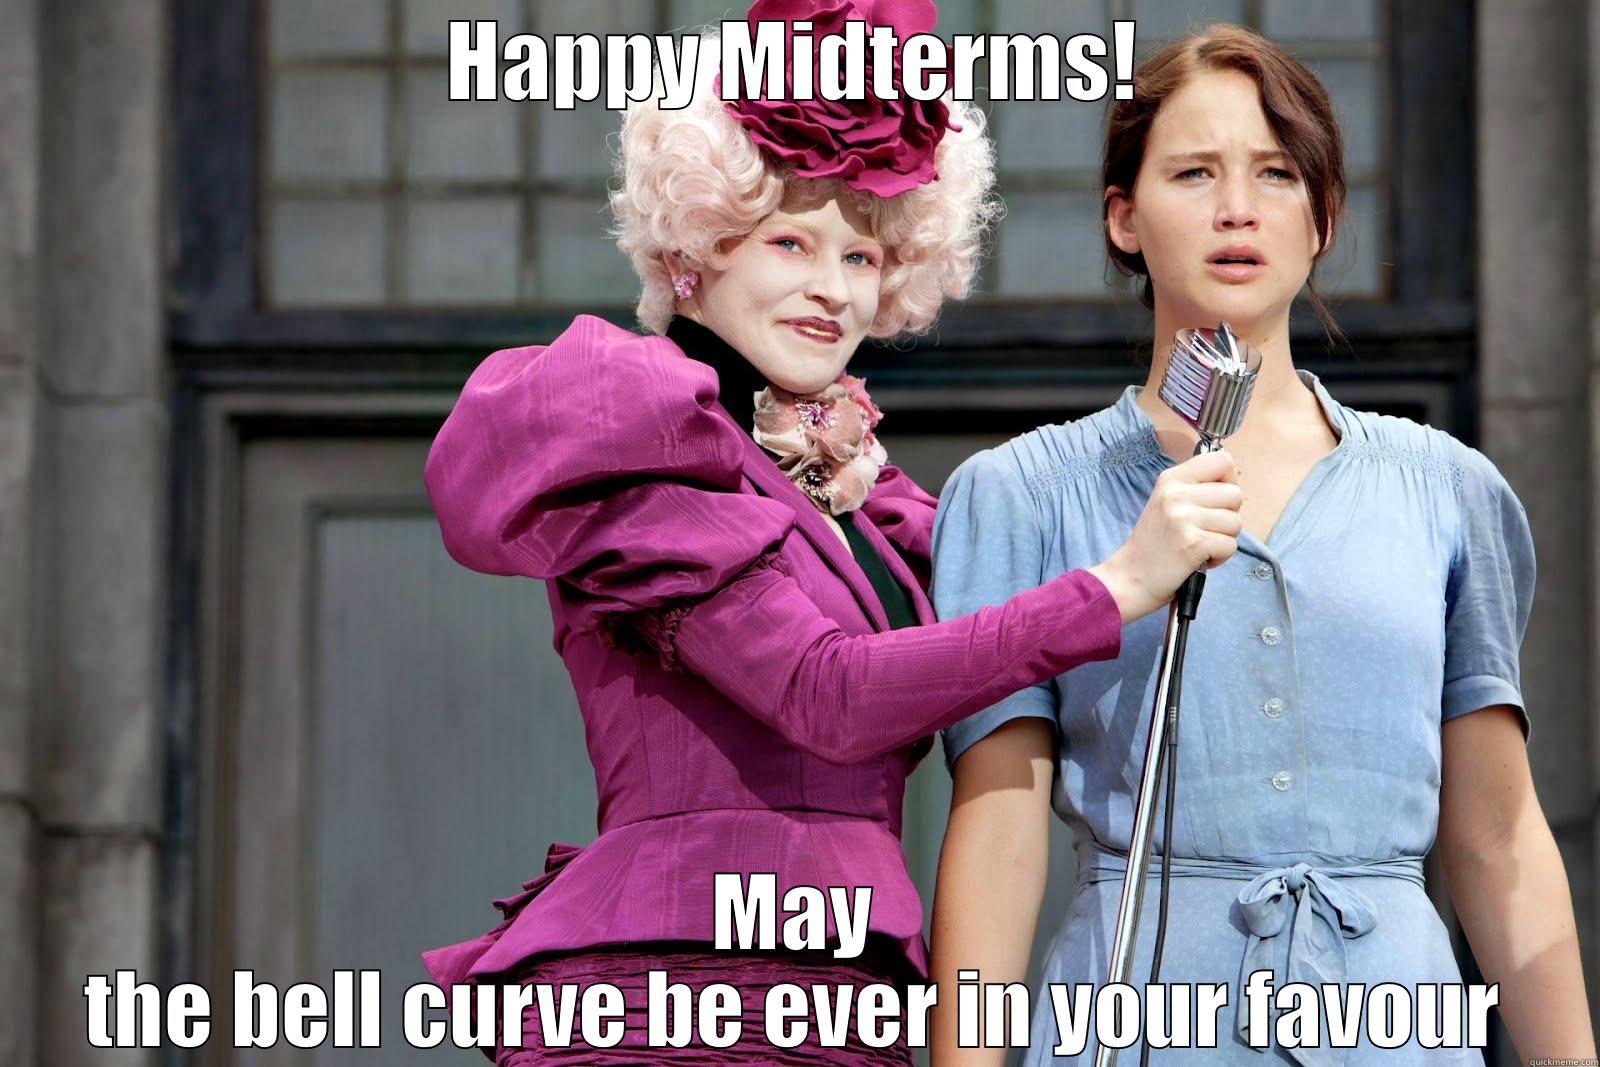 HAPPY MIDTERMS! MAY THE BELL CURVE BE EVER IN YOUR FAVOUR Misc